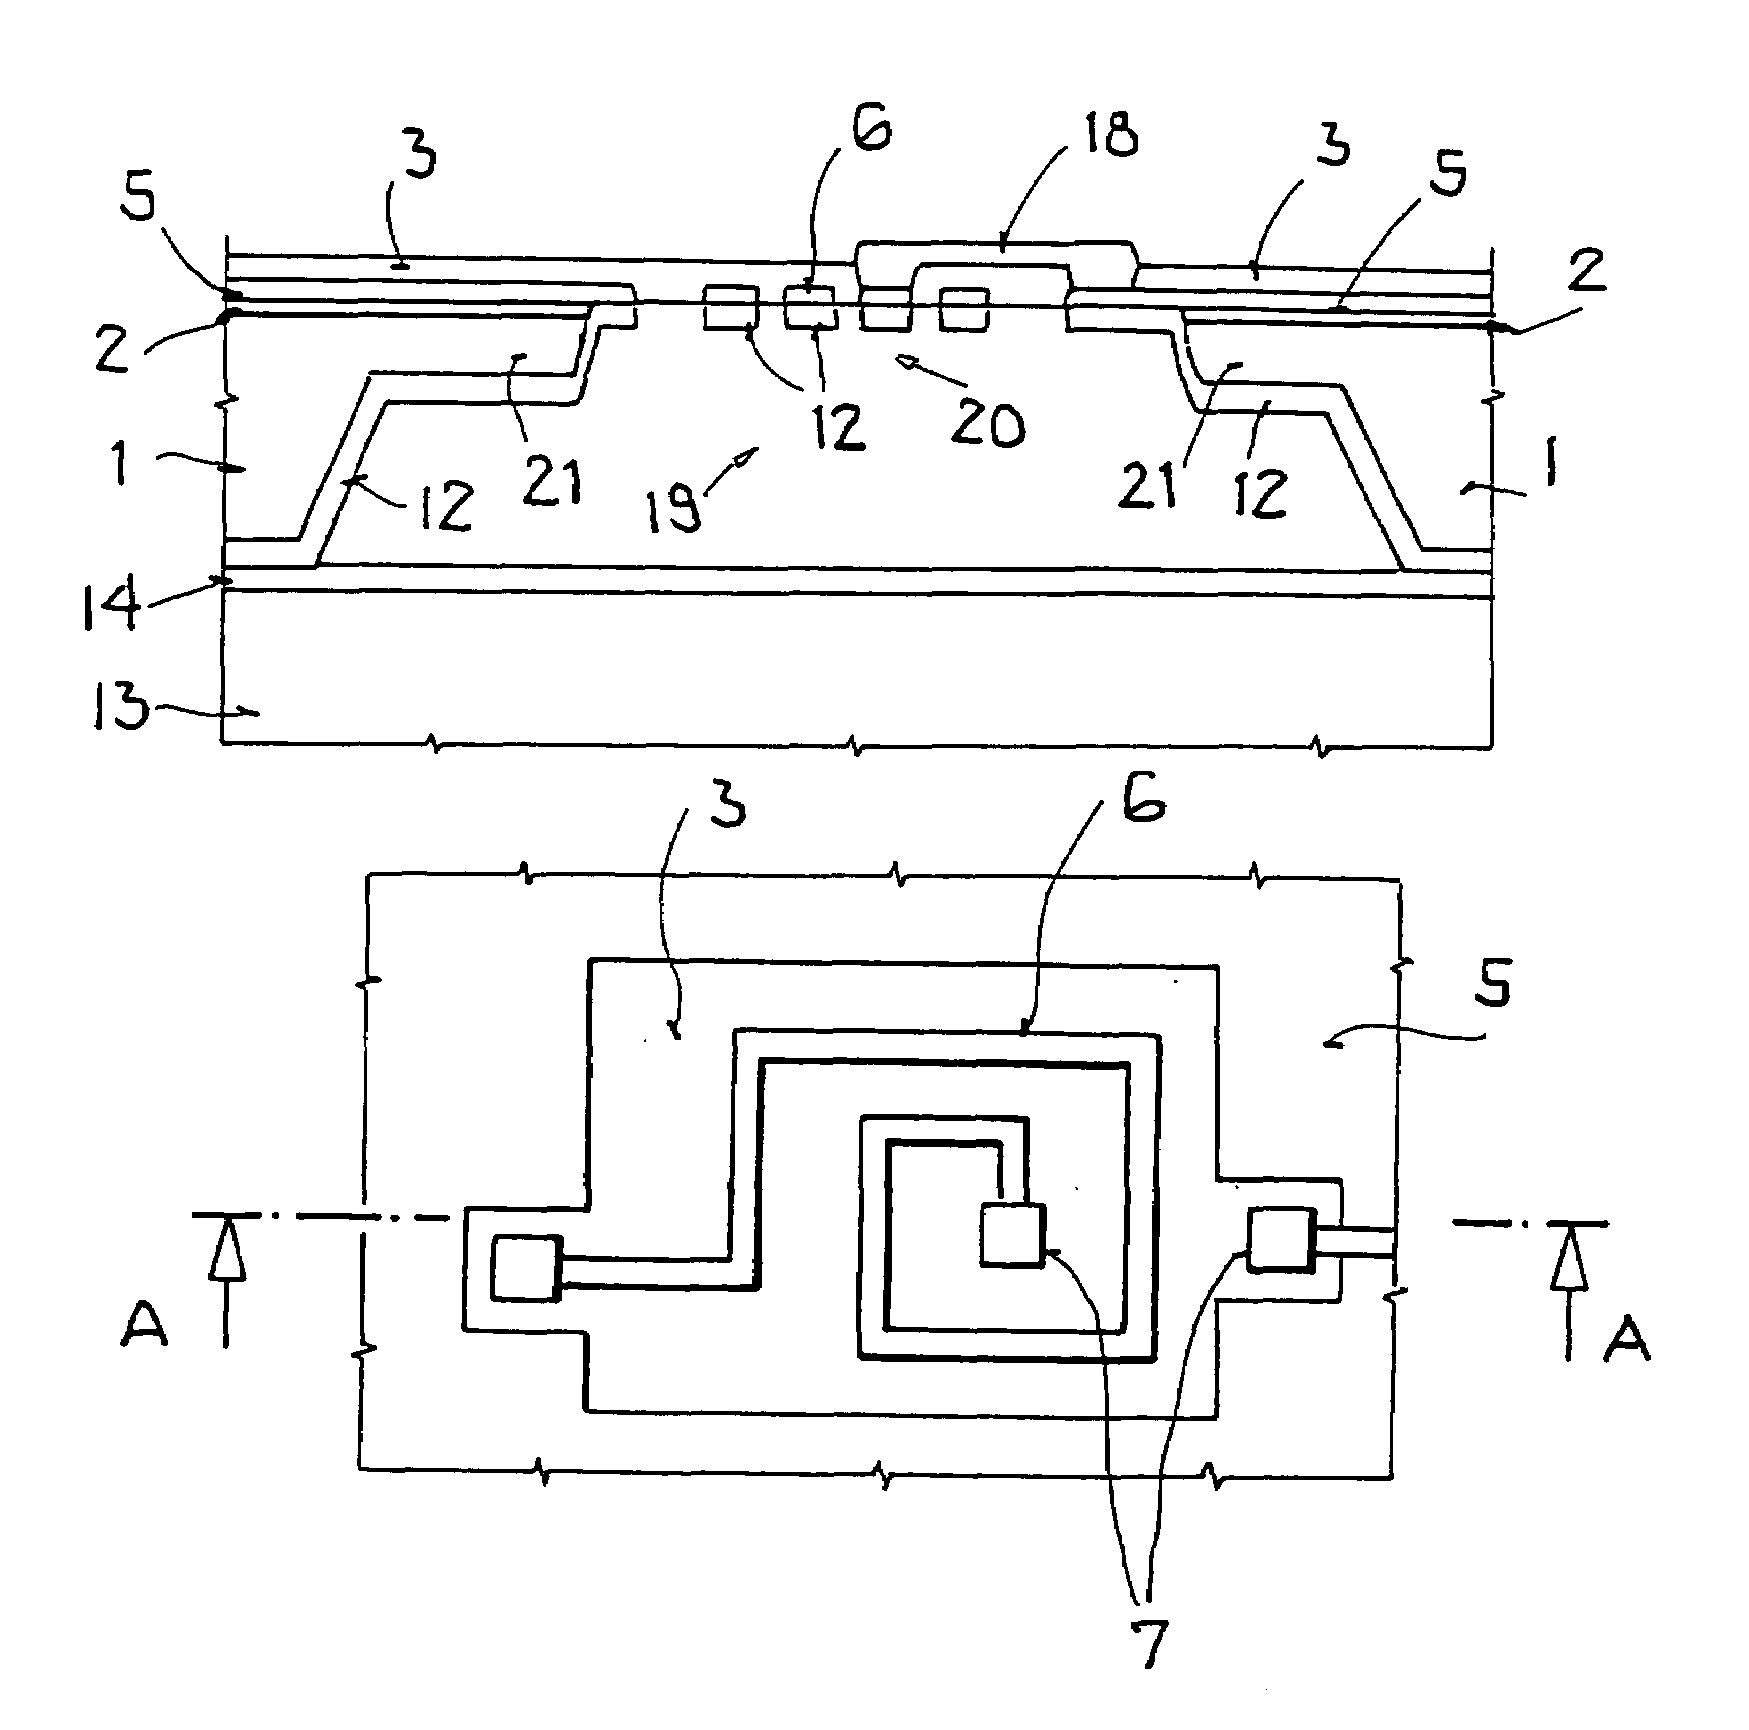 Method for producing a spiral inductance on a substrate, and a device fabricated according to such a method